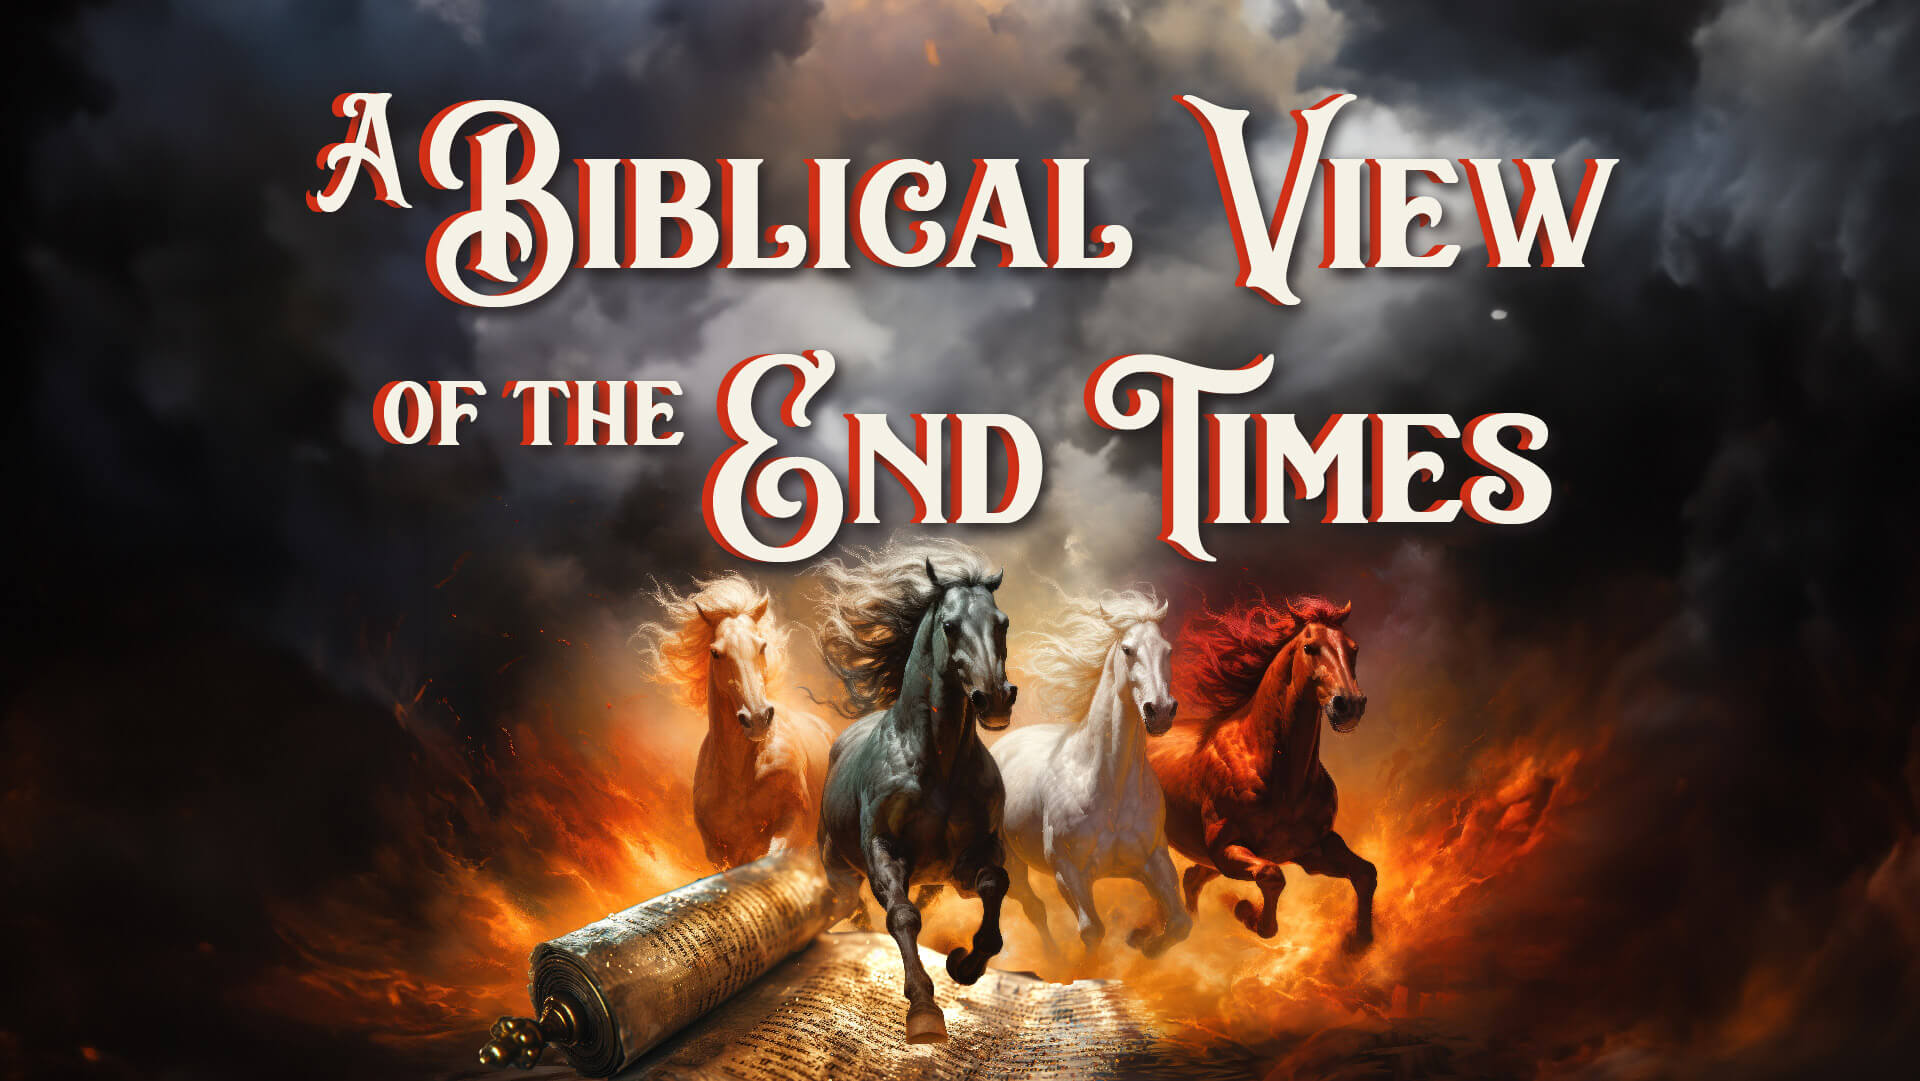 A Biblical View of the End Times